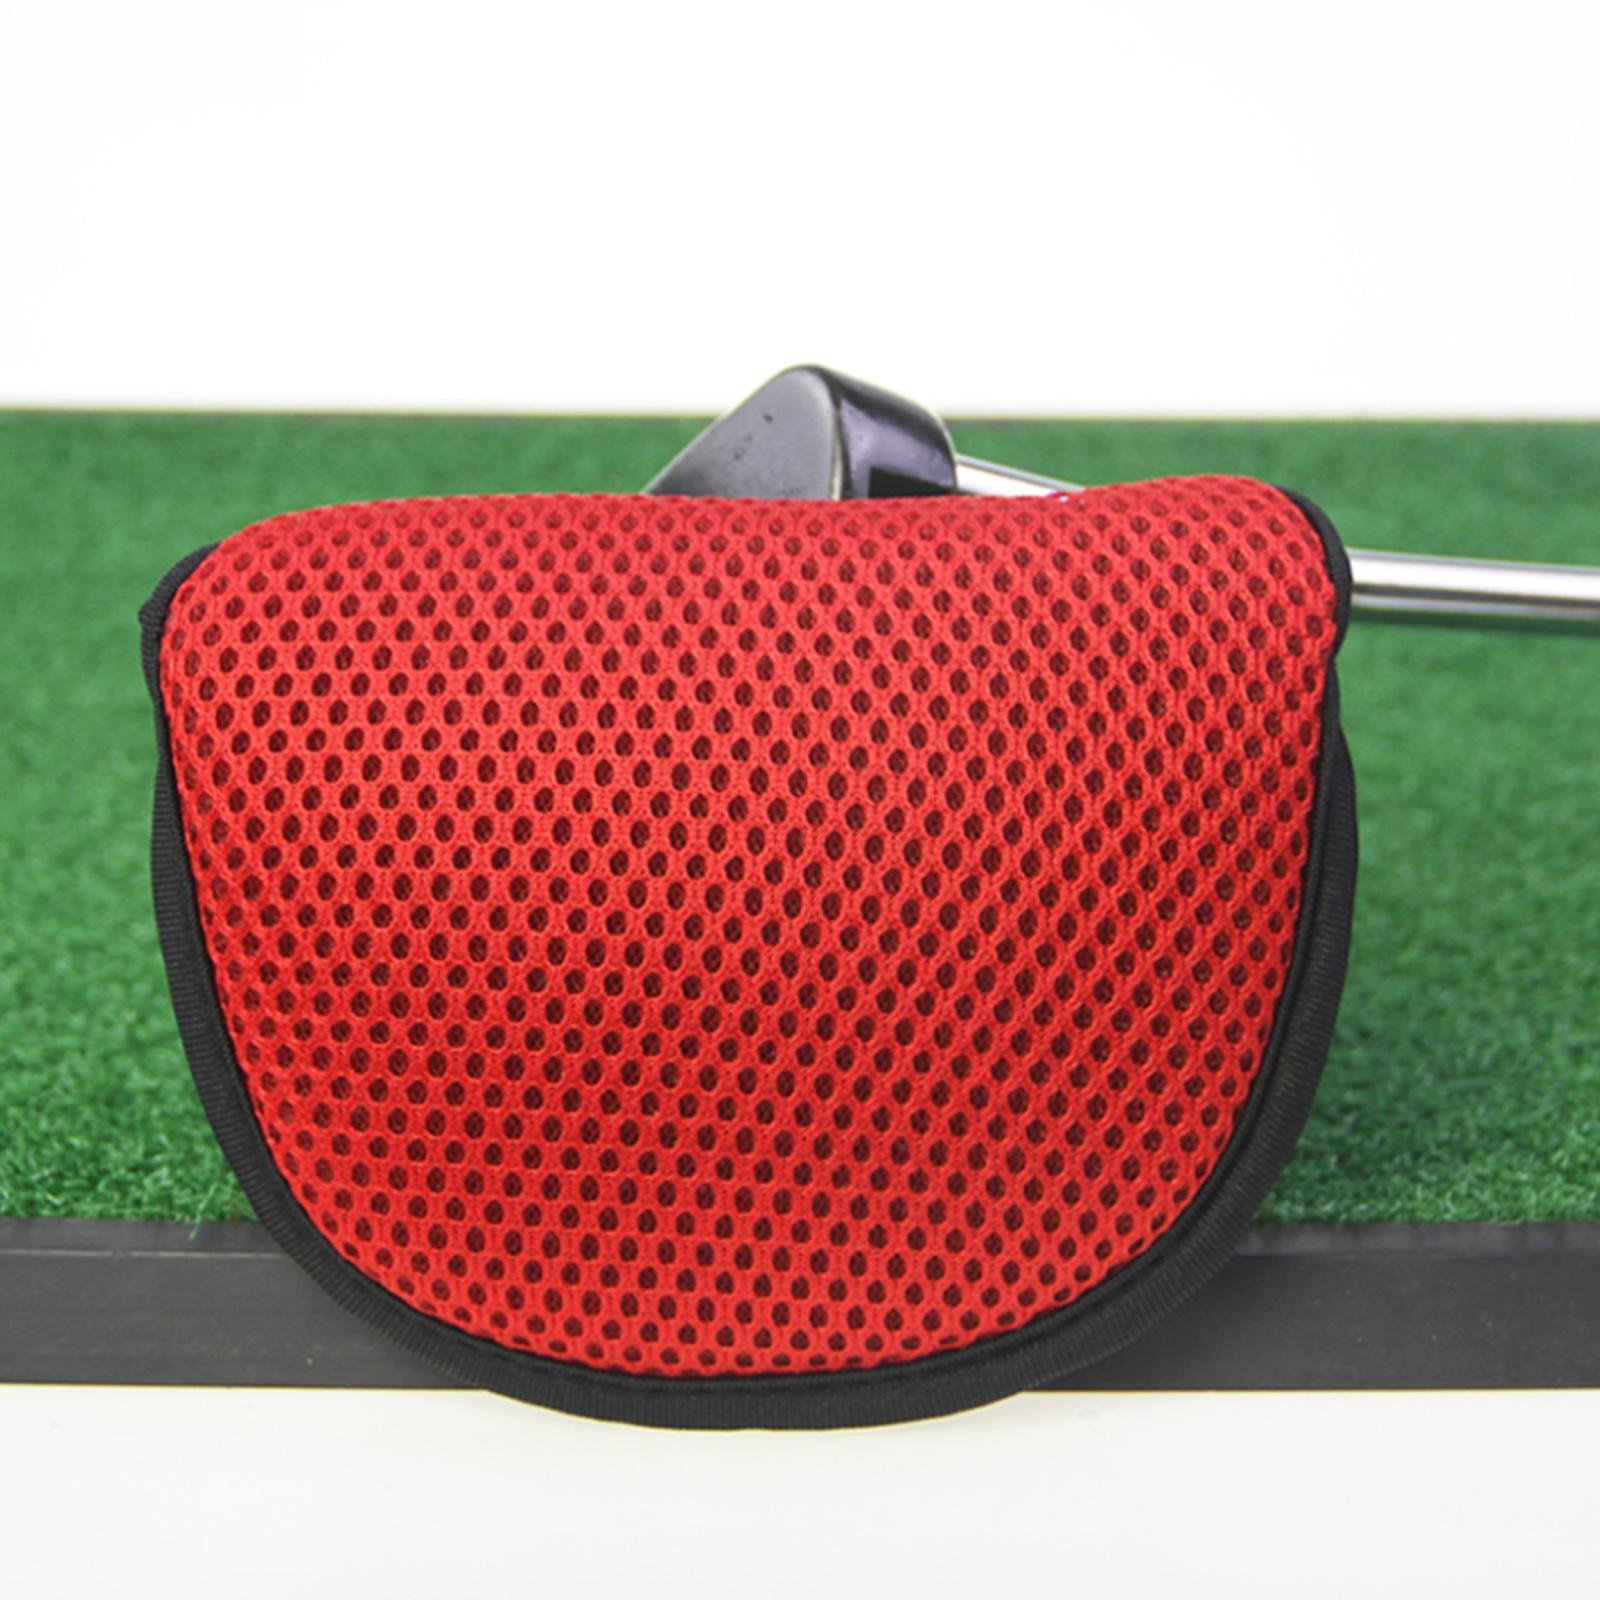 Golf Mallet Putter Head Cover Protect Clubs Headcover Fits All Brands